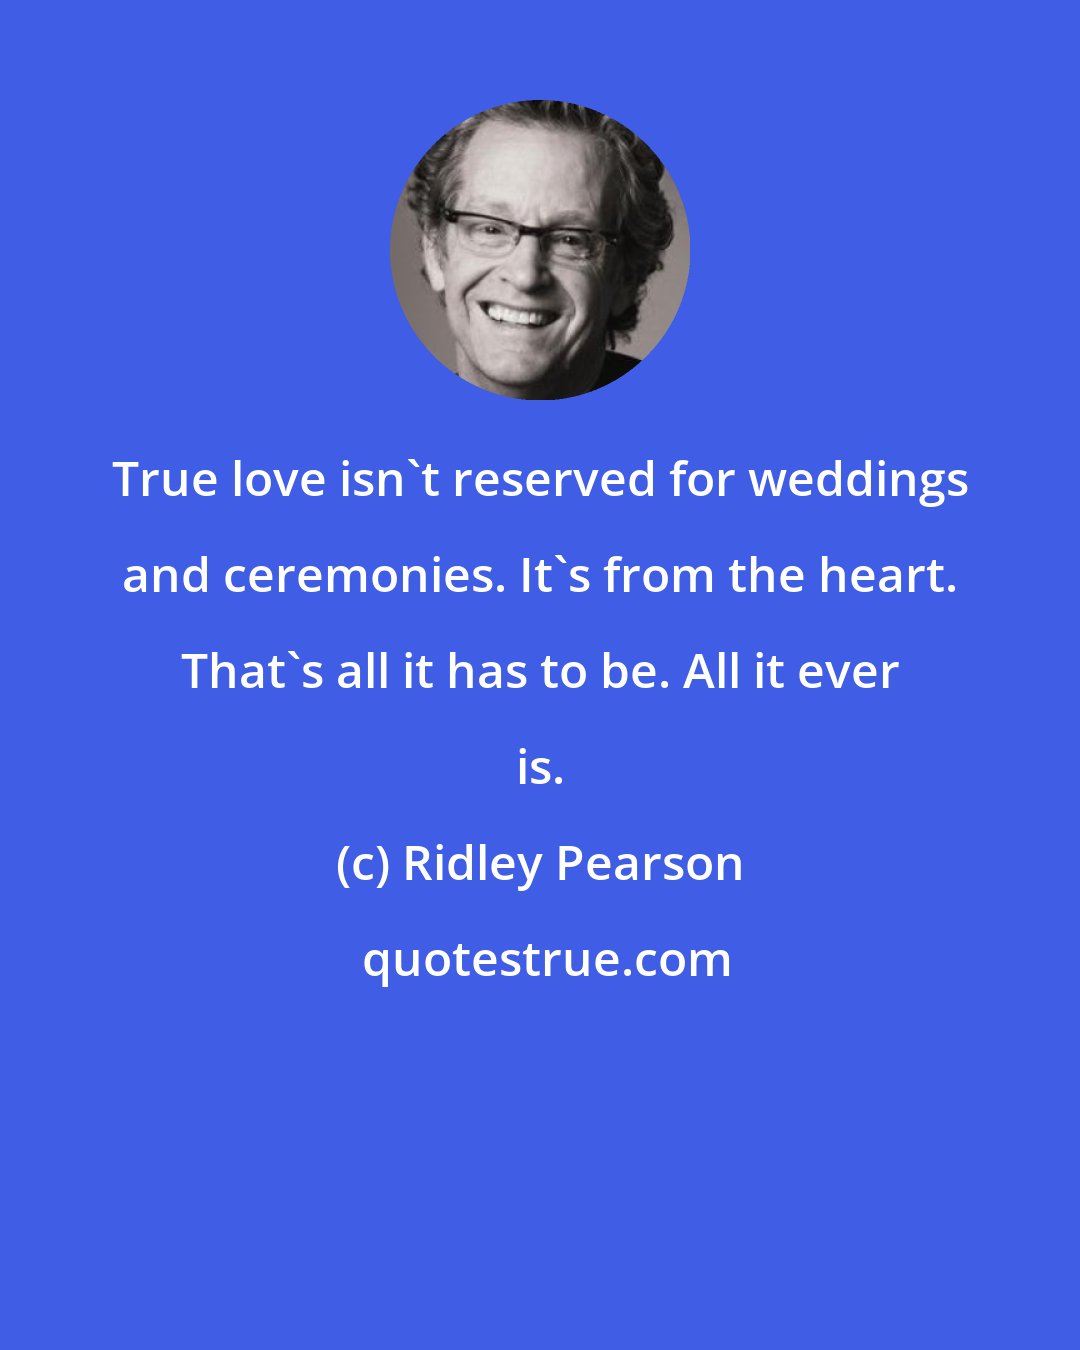 Ridley Pearson: True love isn't reserved for weddings and ceremonies. It's from the heart. That's all it has to be. All it ever is.